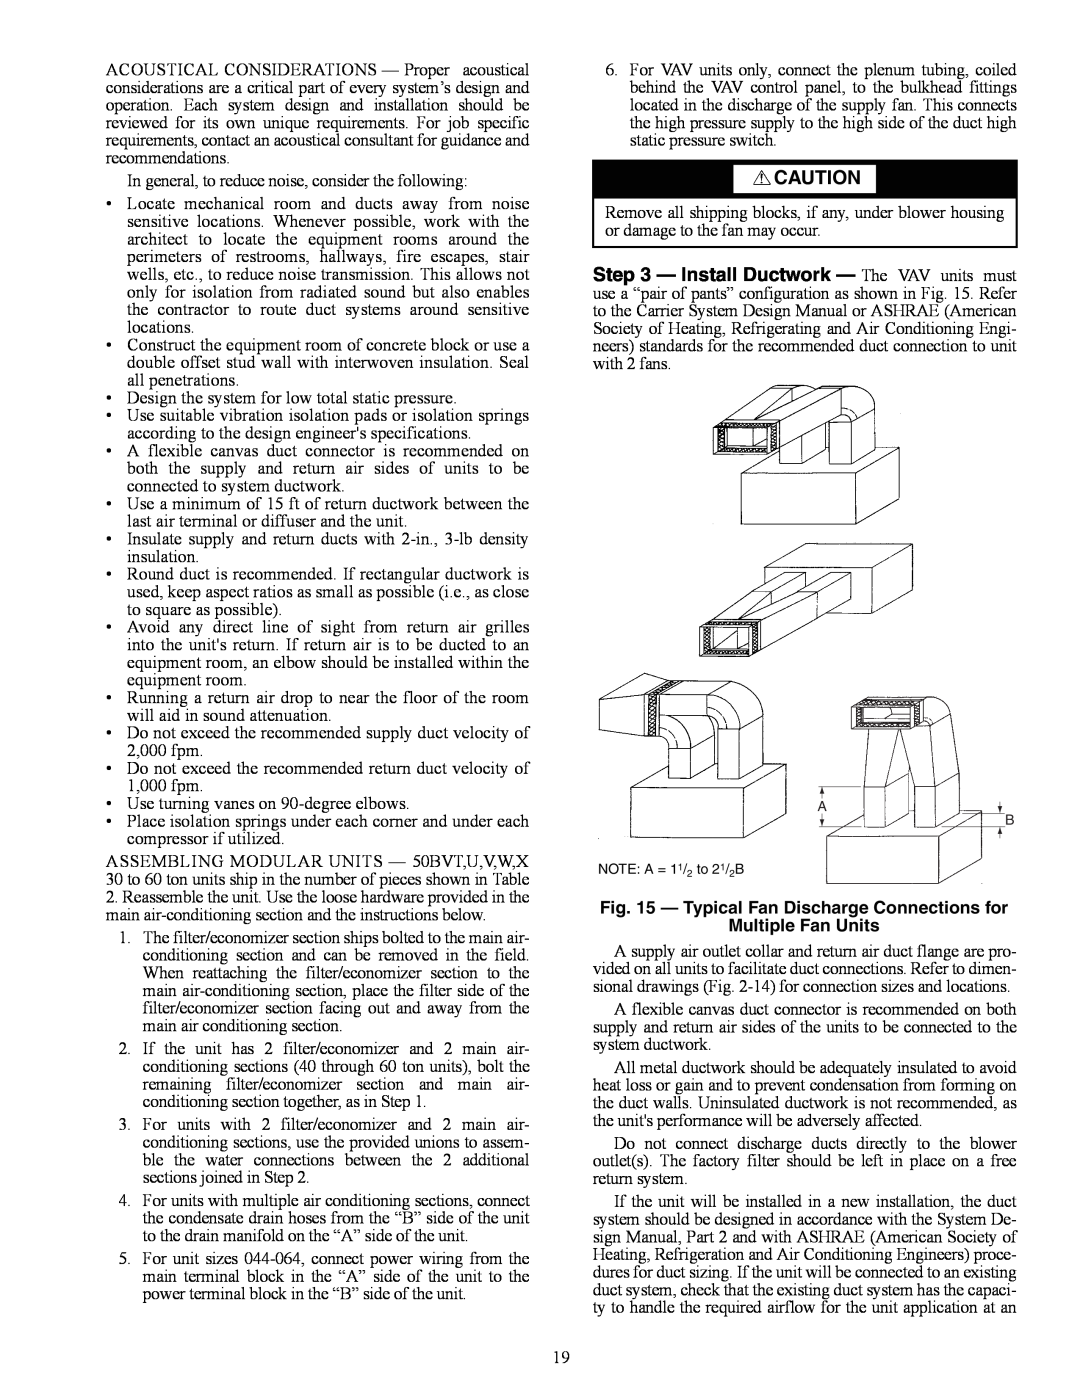 Carrier 50BV020-064 specifications Typical Fan Discharge Connections for, Multiple Fan Units 